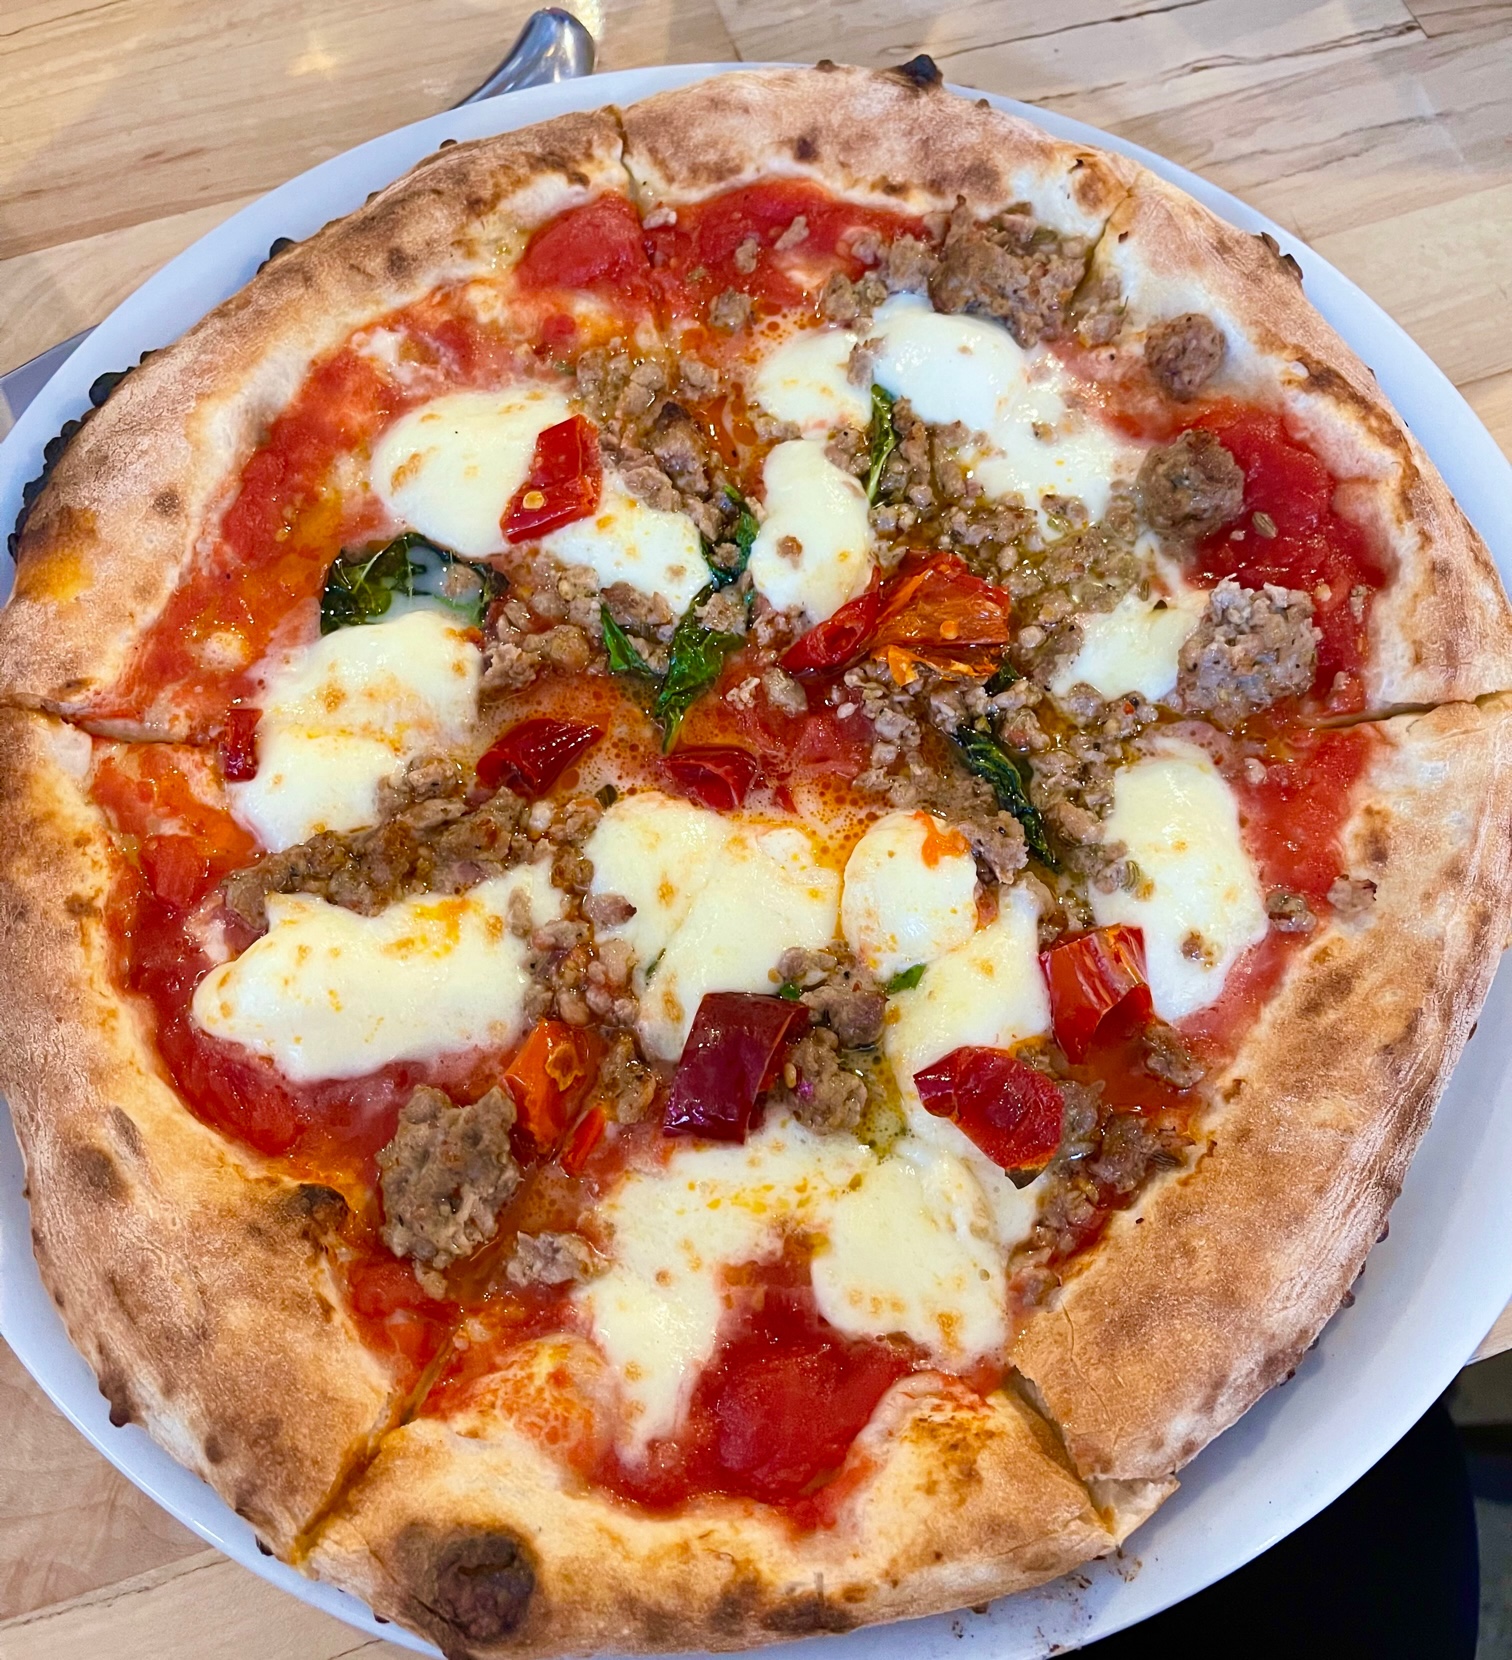 An overhead photo shows a full pie of pizza with crumble sausage, basil, peppers, red sauce, and lots of cheese. Photo by Stephanie Wheatley.